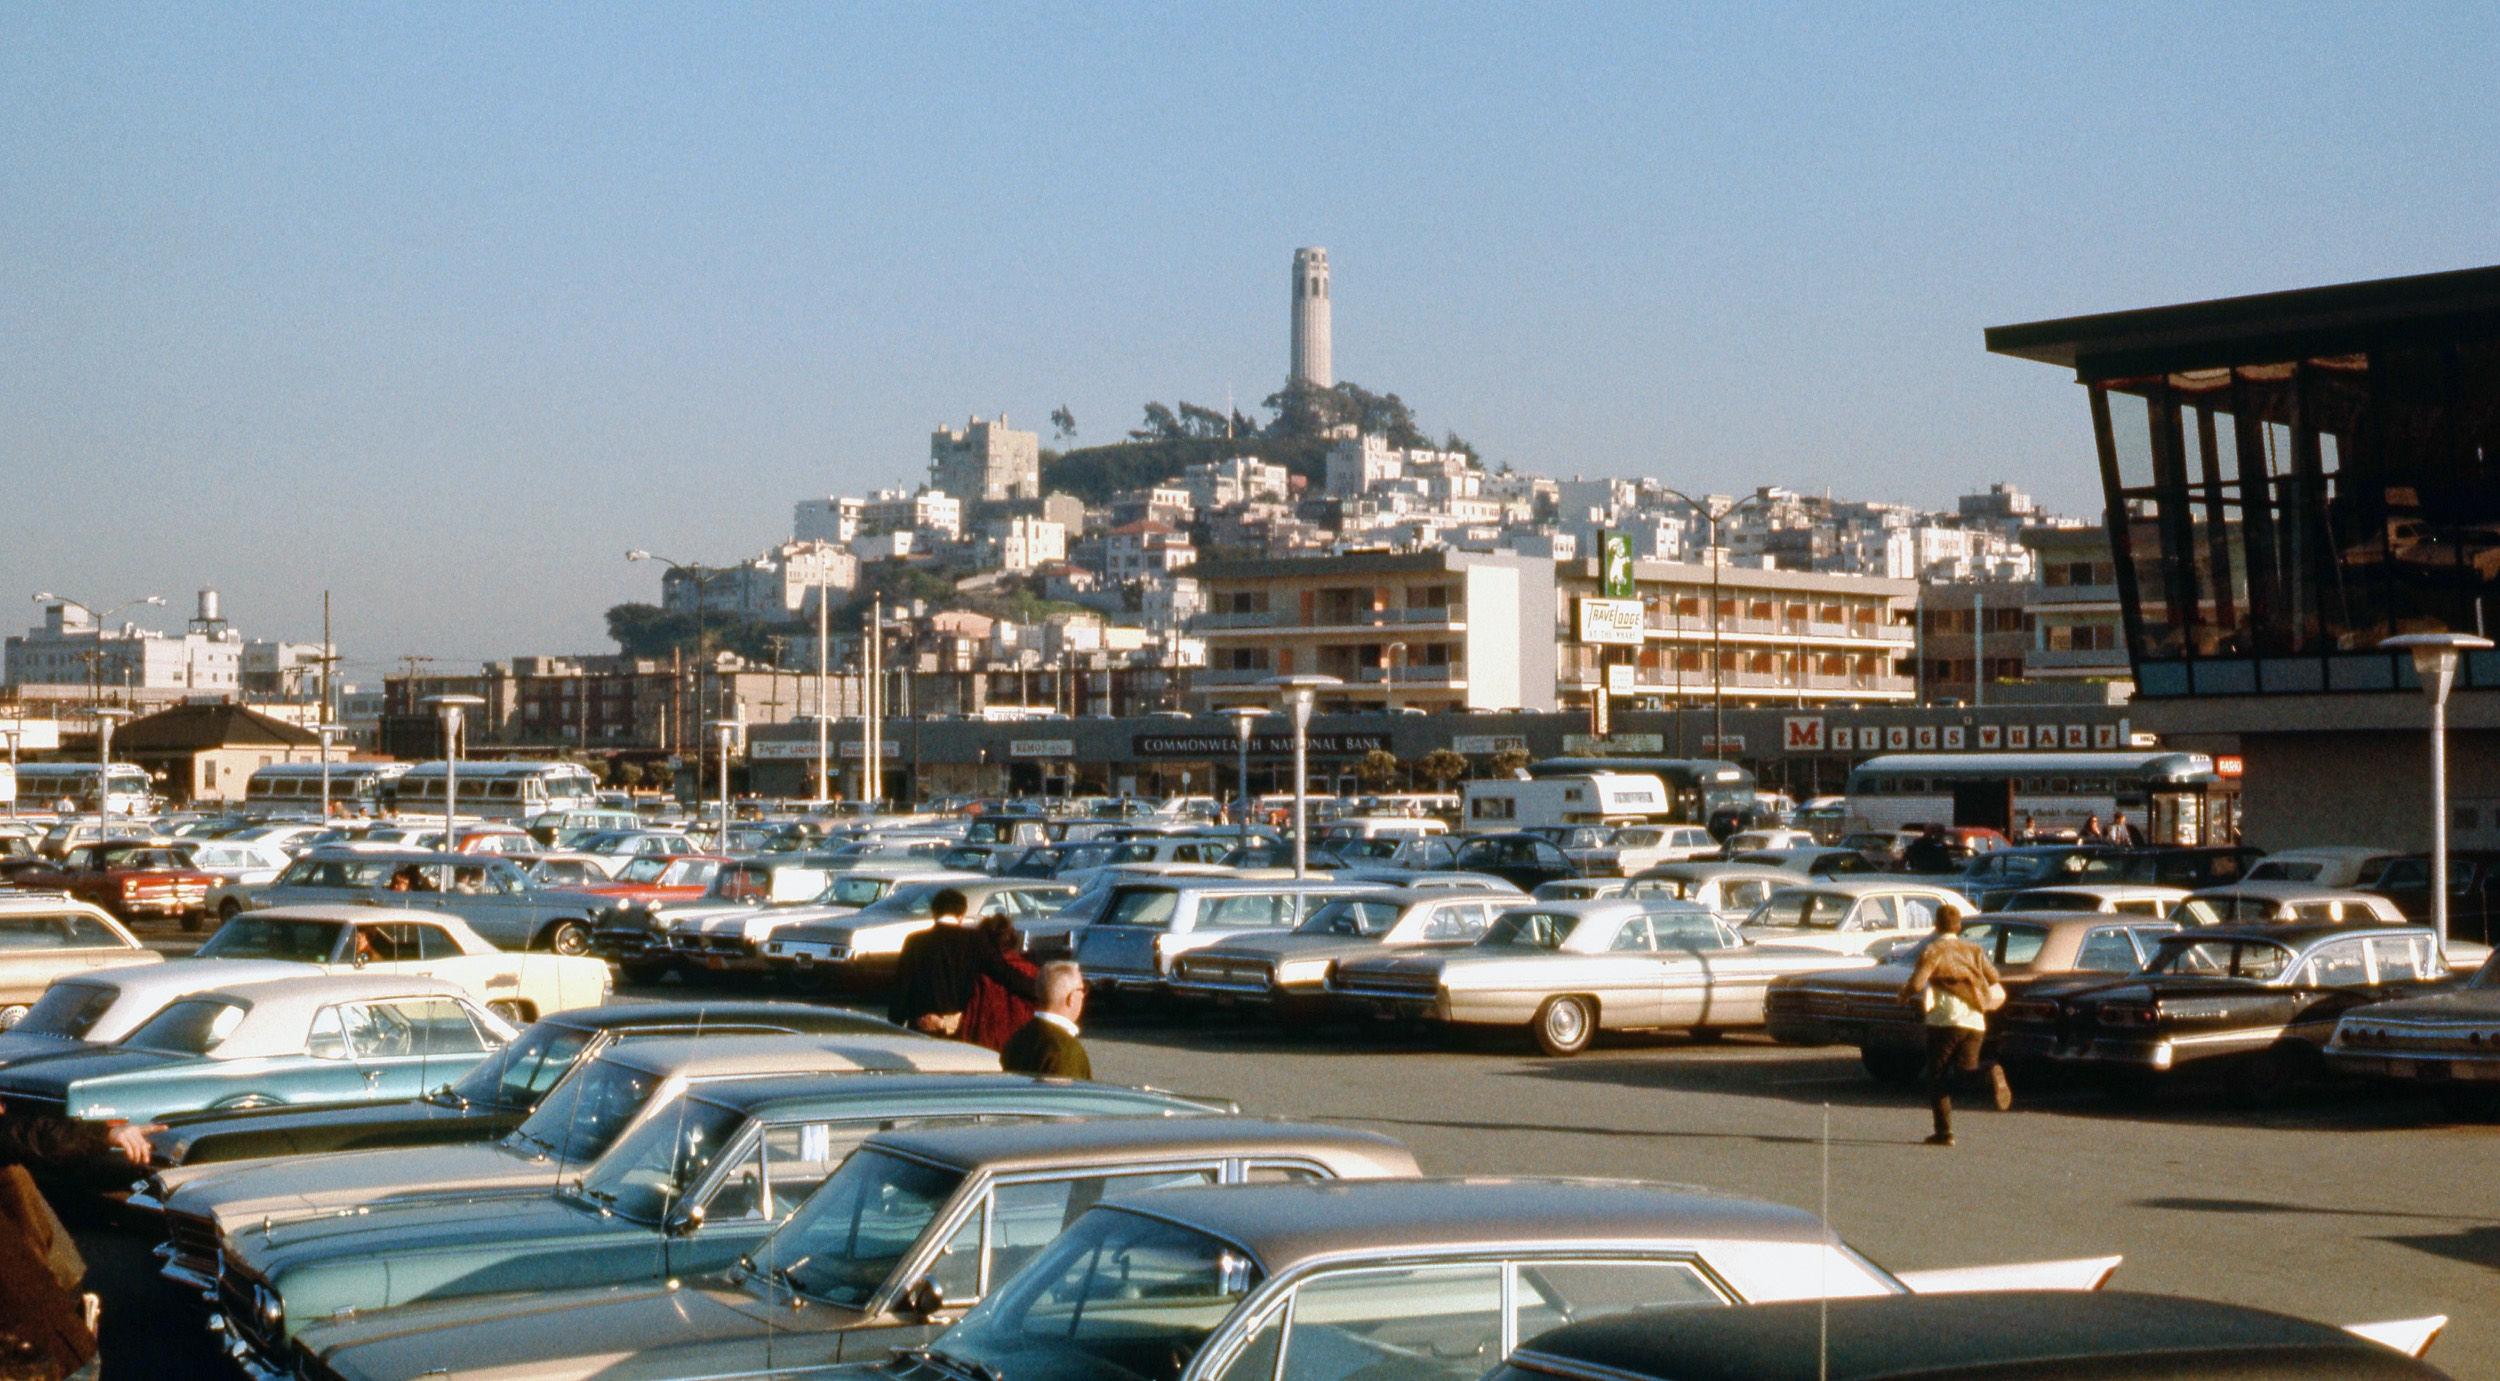 San Francisco's Coit Tower from a parking lot vantage point, March 1969. Taken with a Pentax 35 mm SLR camera. View full size.